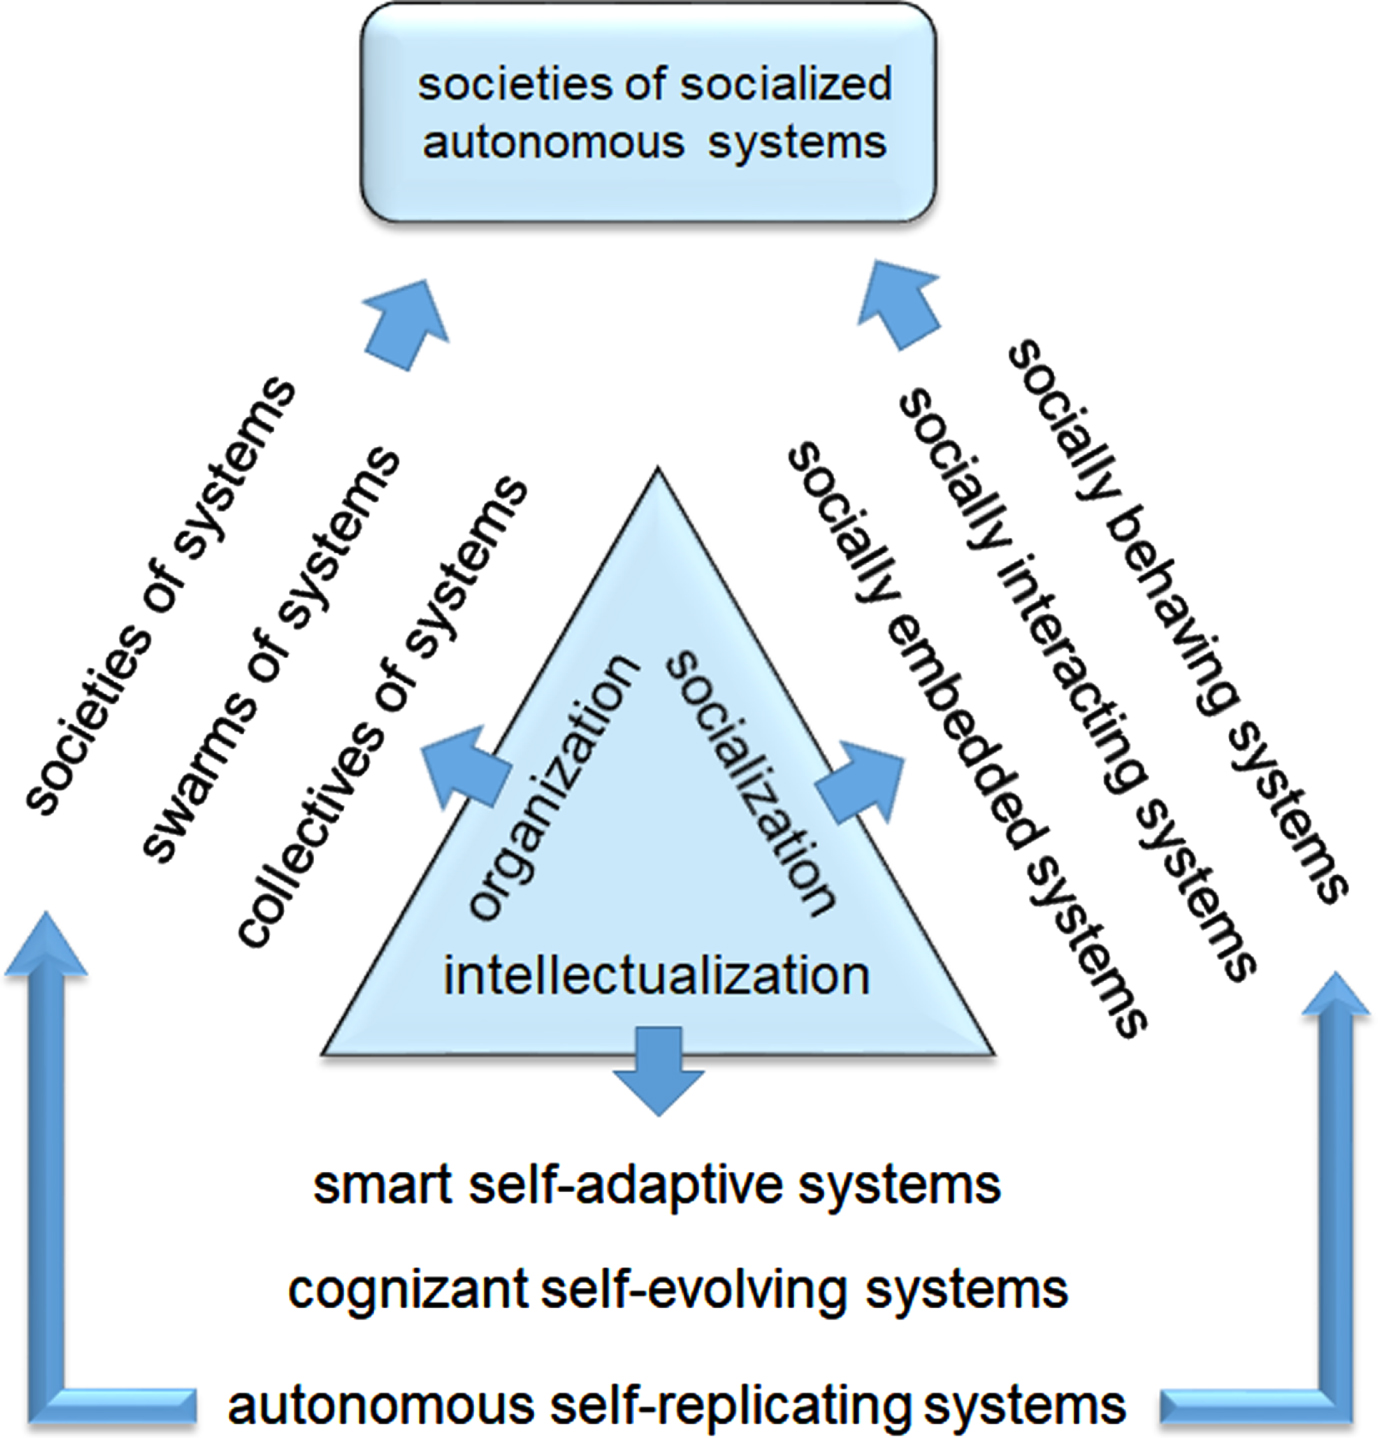 Convergence of organization, intellectualization, and socialization of CPSs.